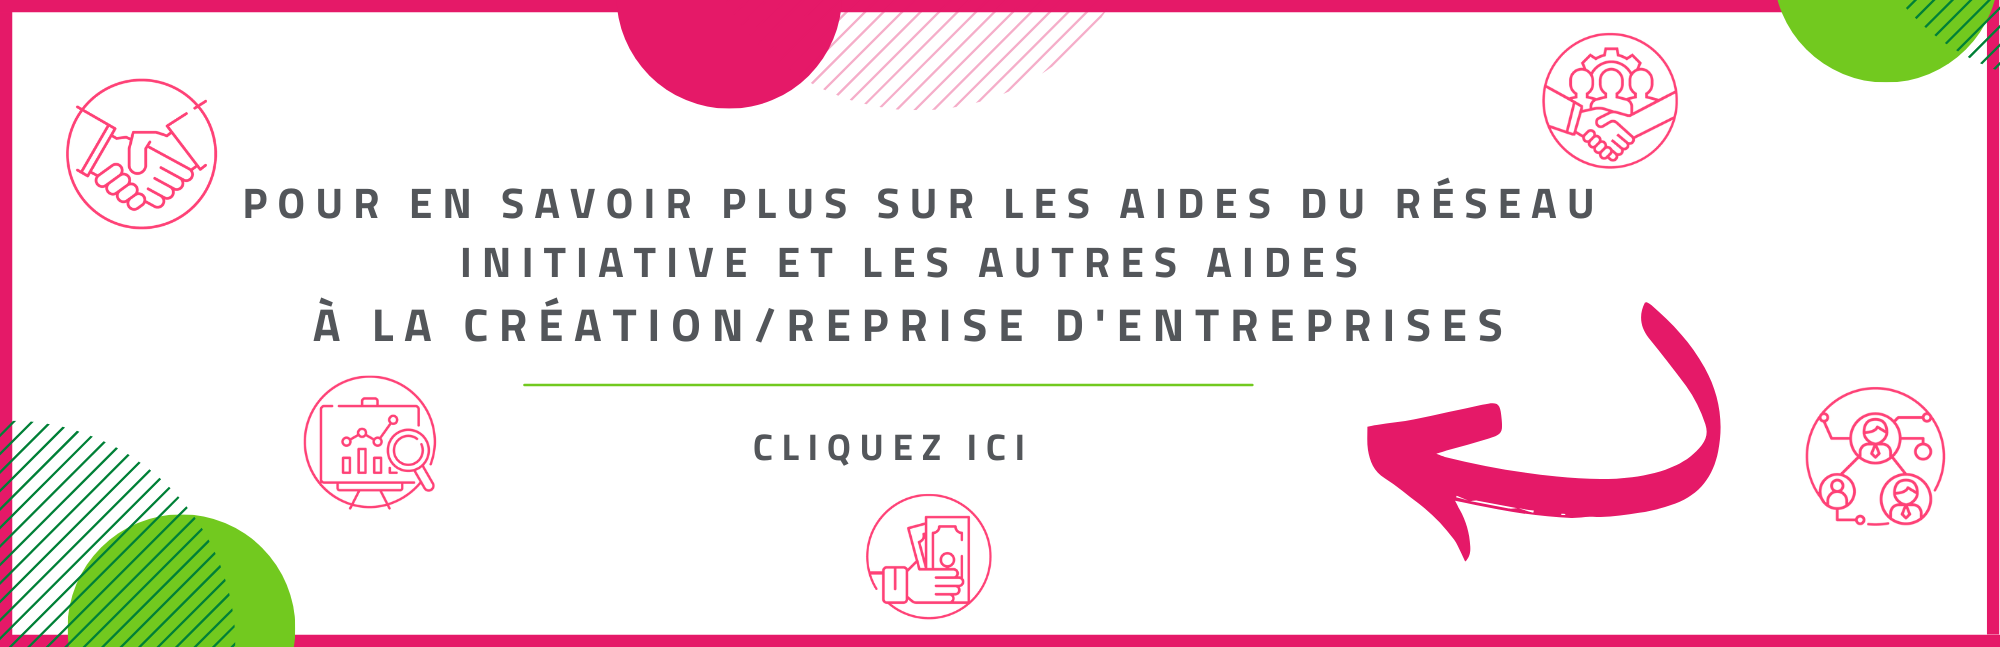 clic_aides.png